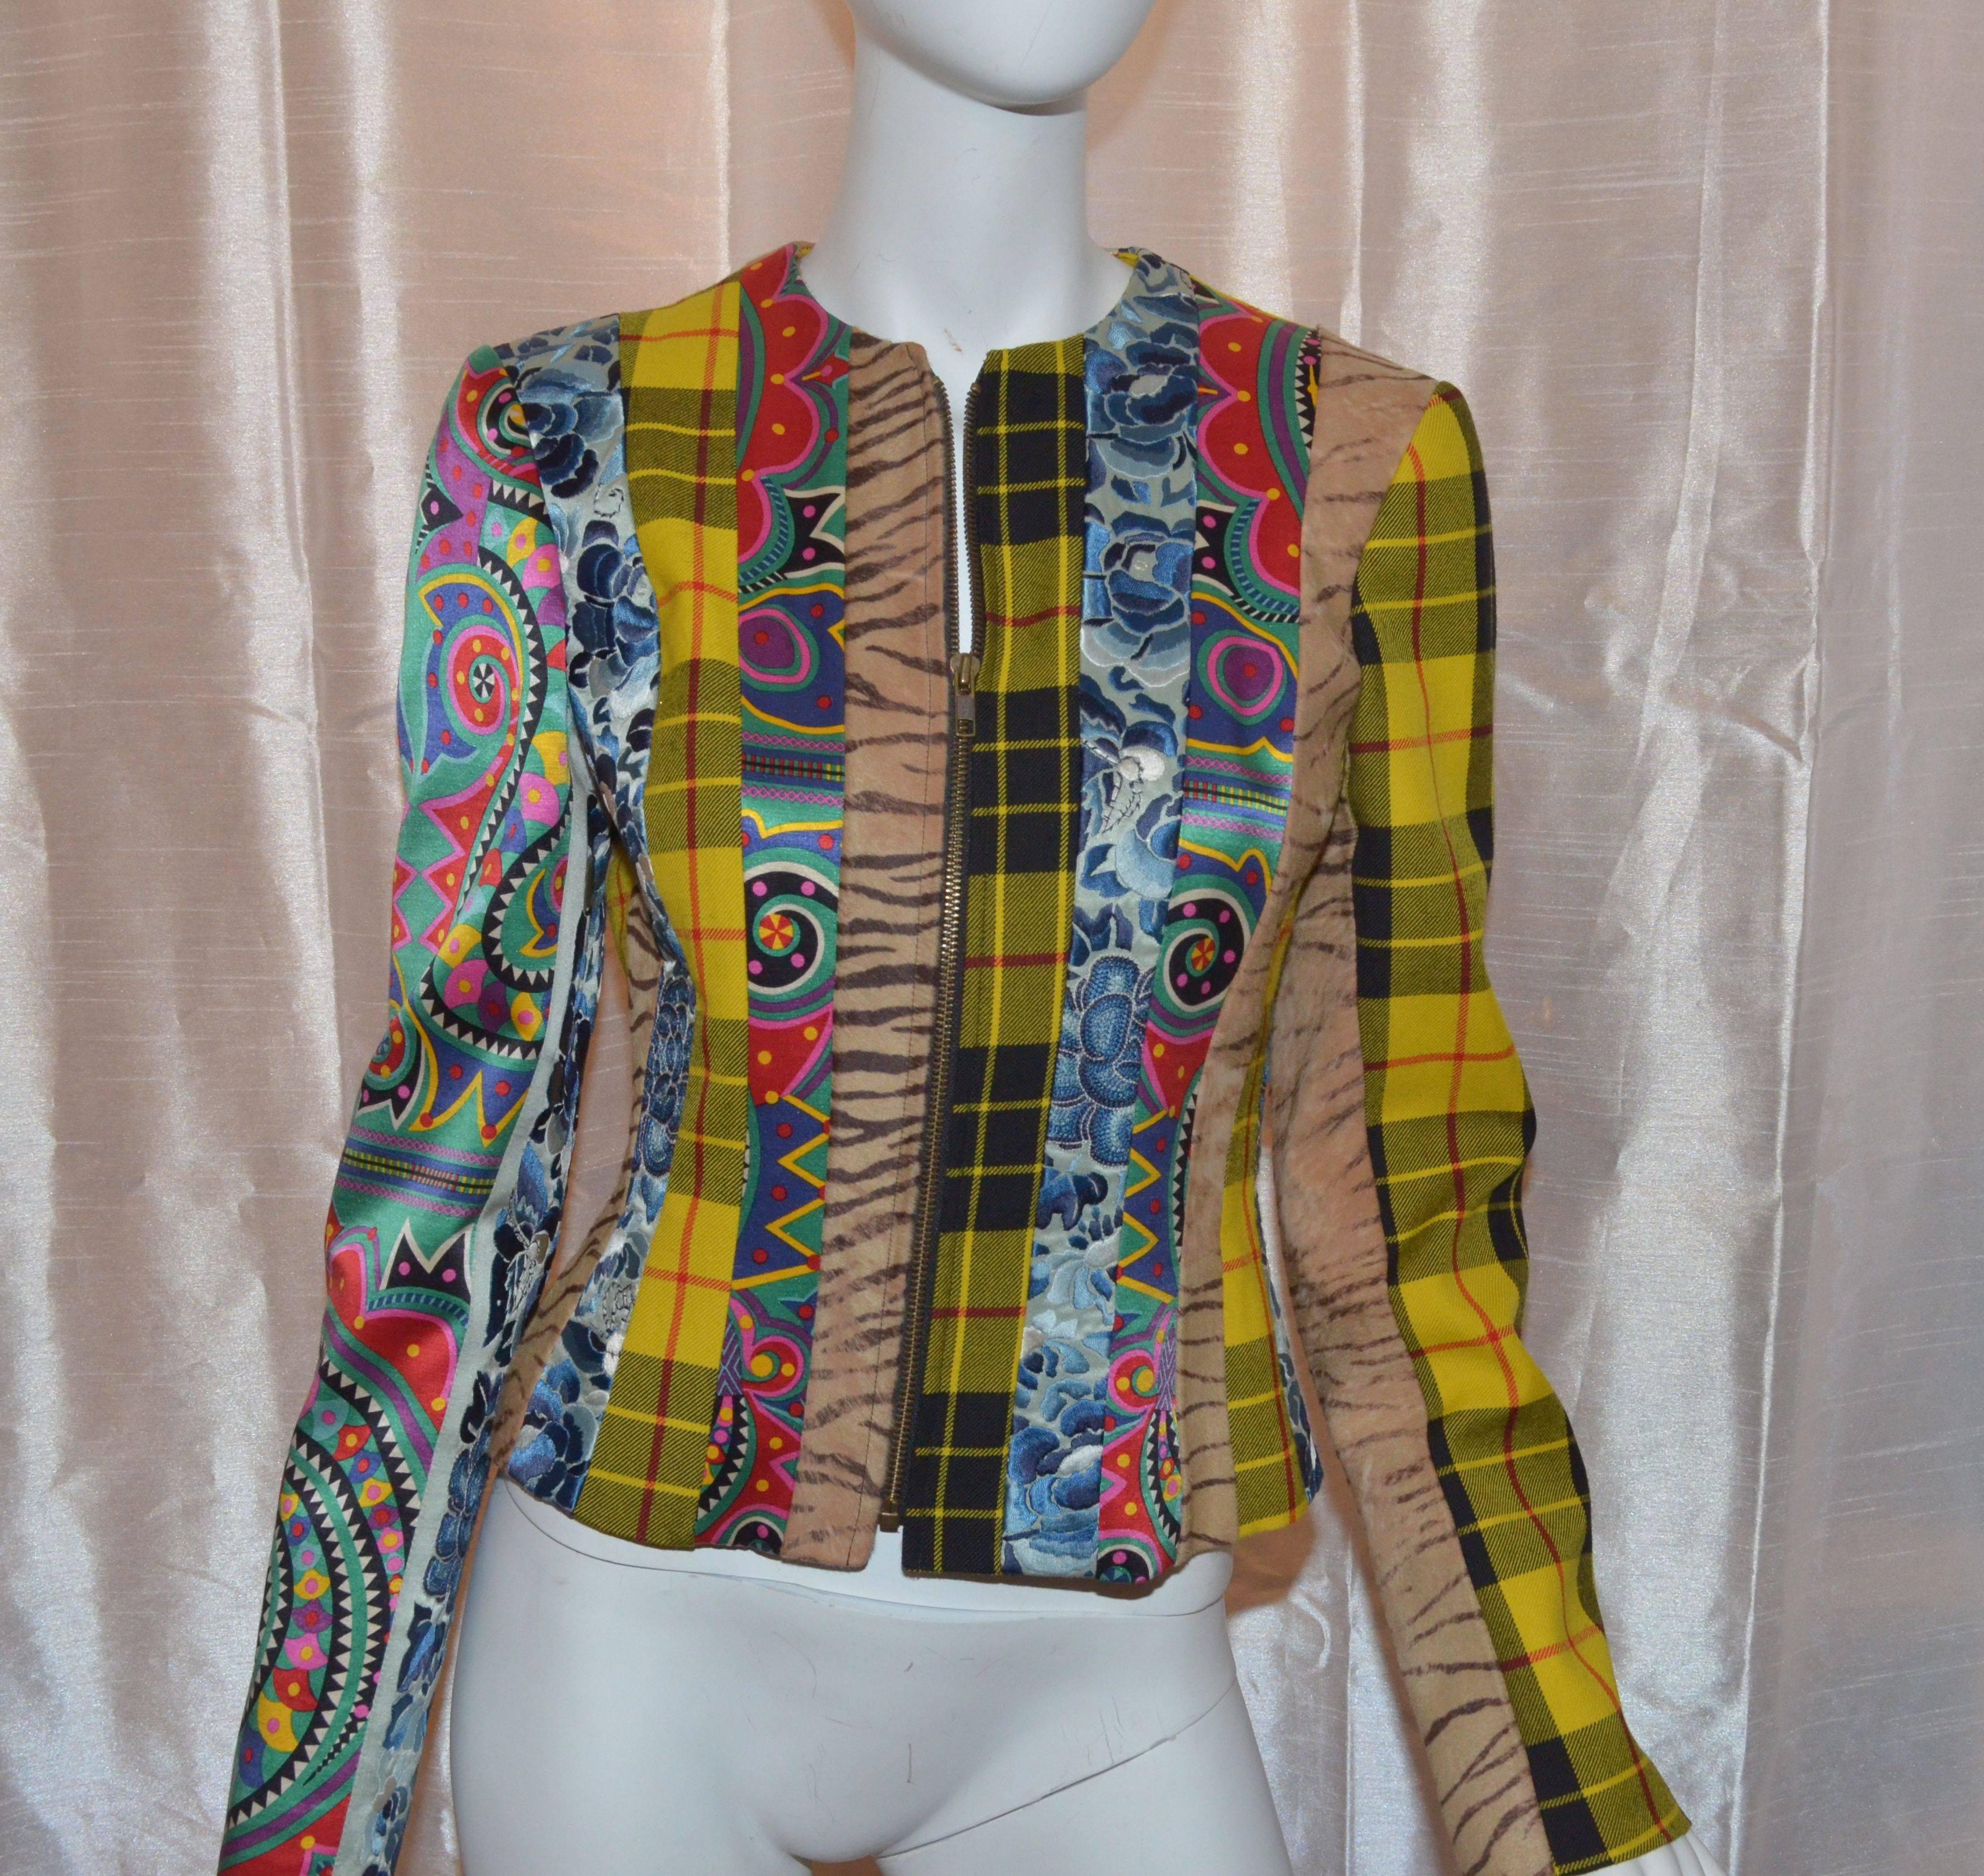 John Galliano jacket has a zipper front closure and is fully lined in 100% silk. Left sleeve of the jacket features a plaid wool and printed calfskin panel; Right sleeve has a multicolored print satin panel and a floral embroidered panel. Made in